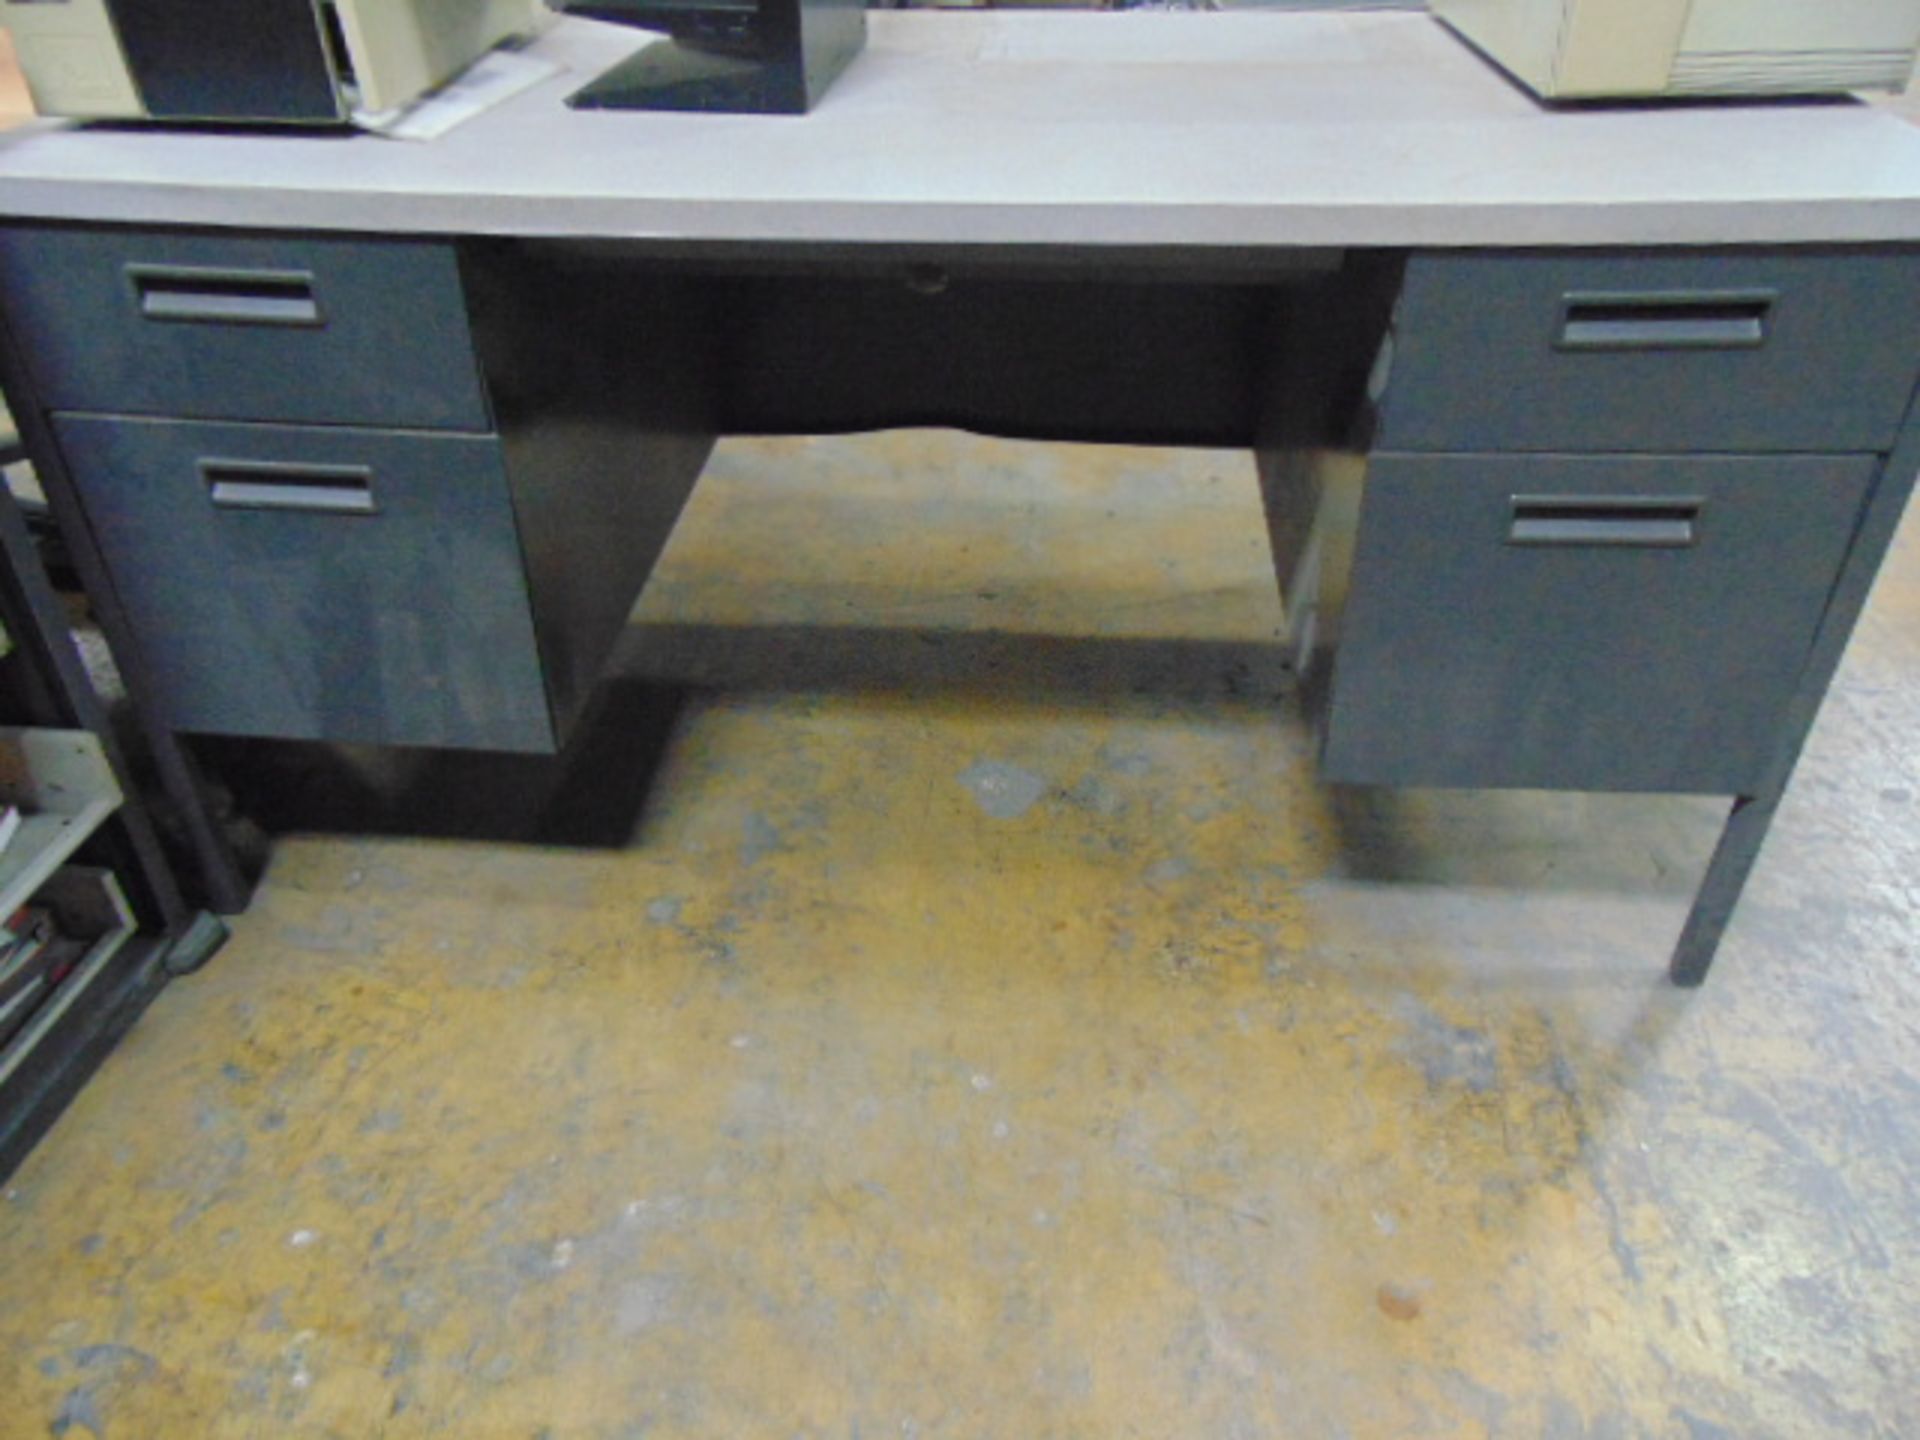 LOT CONSISTING OF: (2) work benches, desk, assorted hardware & arbor press - Image 10 of 10